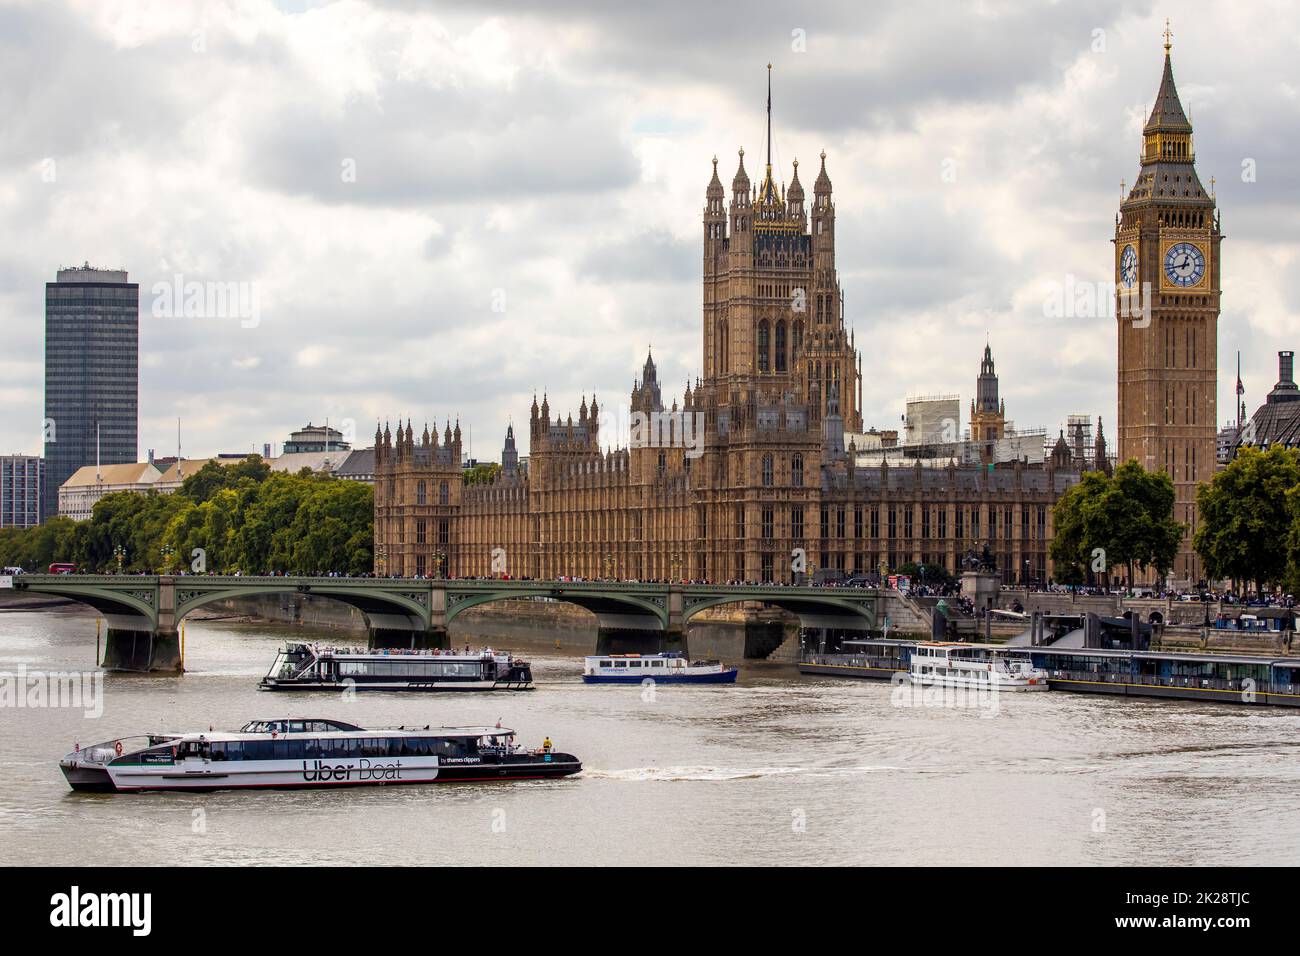 London, UK - September 14th 2022: An Uber Boat on the River Thames in London, UK, with the magnificent Palace of Westminster in the background. Stock Photo